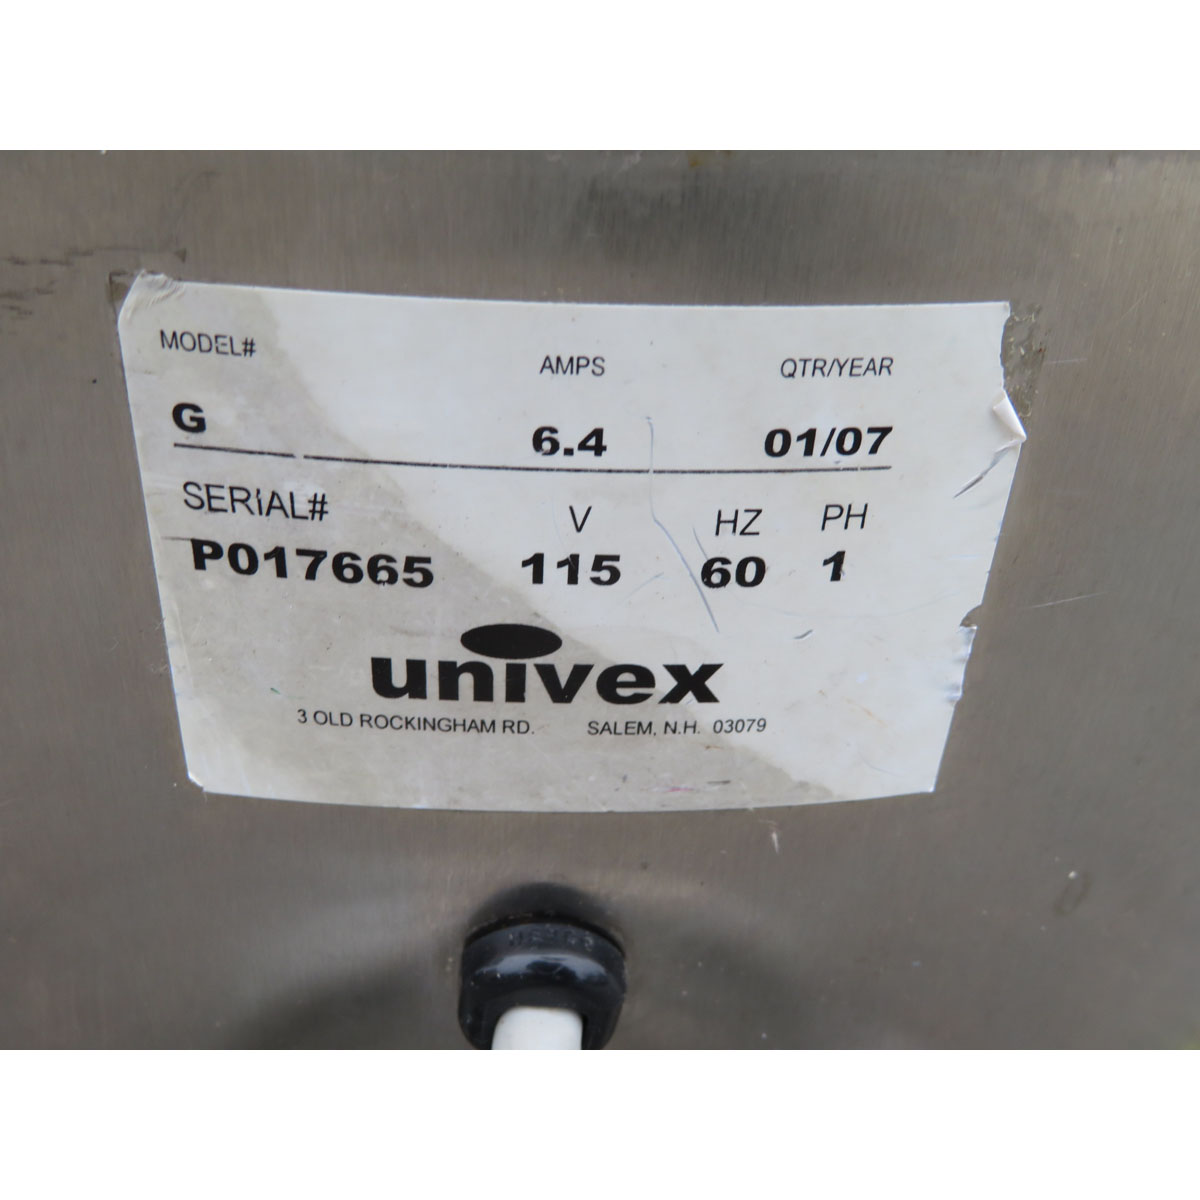 Univex G Peeler, Used Excellent Condition image 2